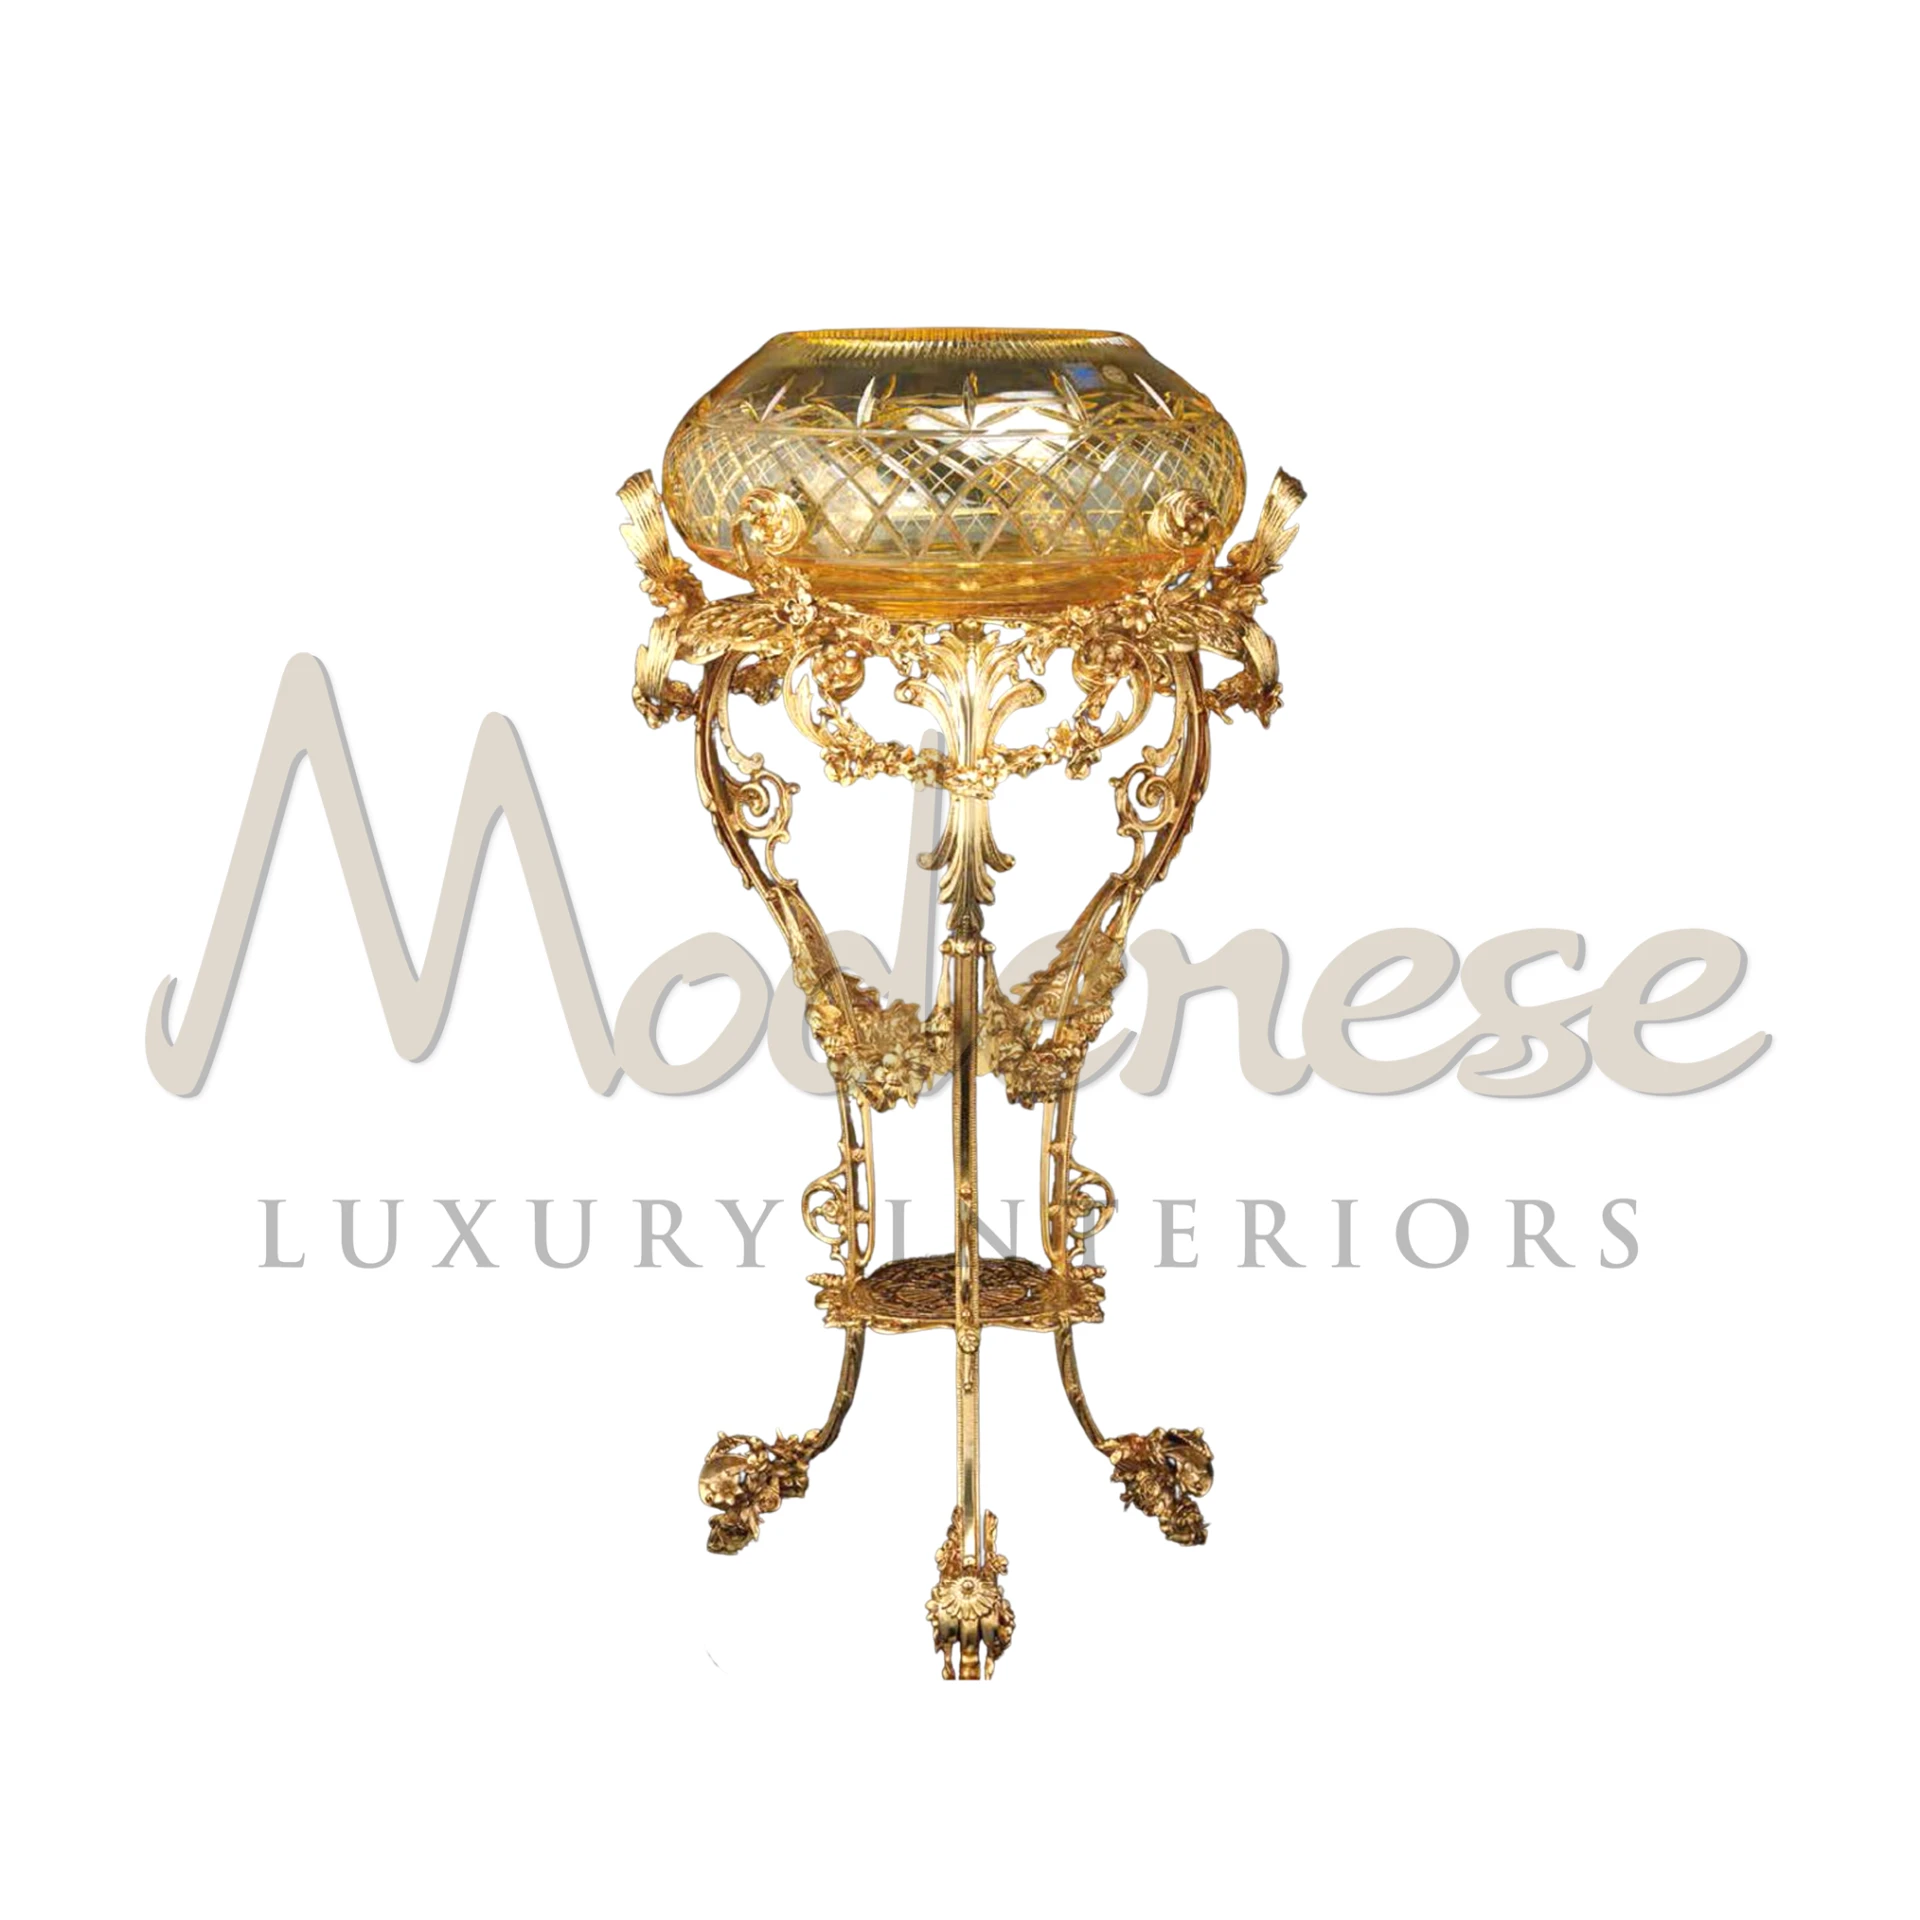 Italian Design Classic Vase Stand, a Baroque symbol of opulence with gold leaf and high-quality wood.